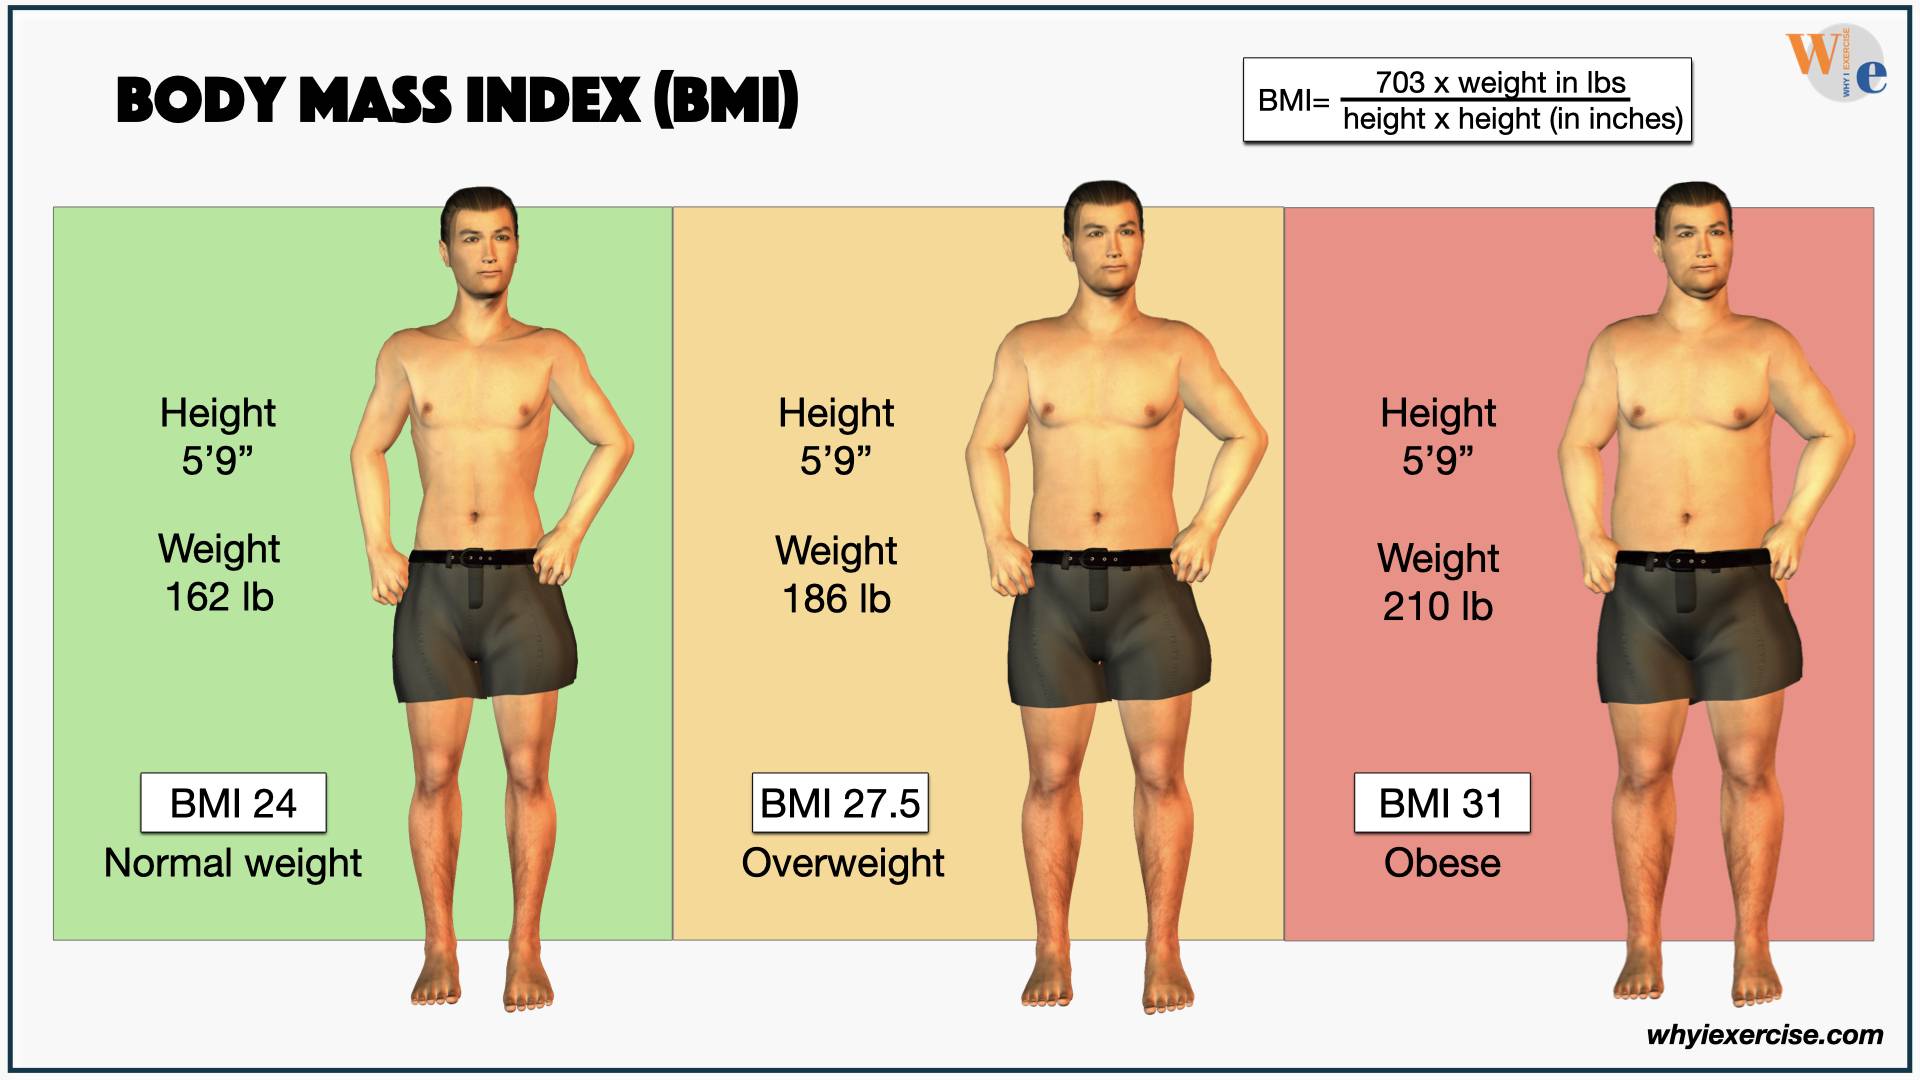 https://www.whyiexercise.com/images/xbody-mass-index-overweight-obese-men.jpg.pagespeed.ic.688jgRvCV0.jpg